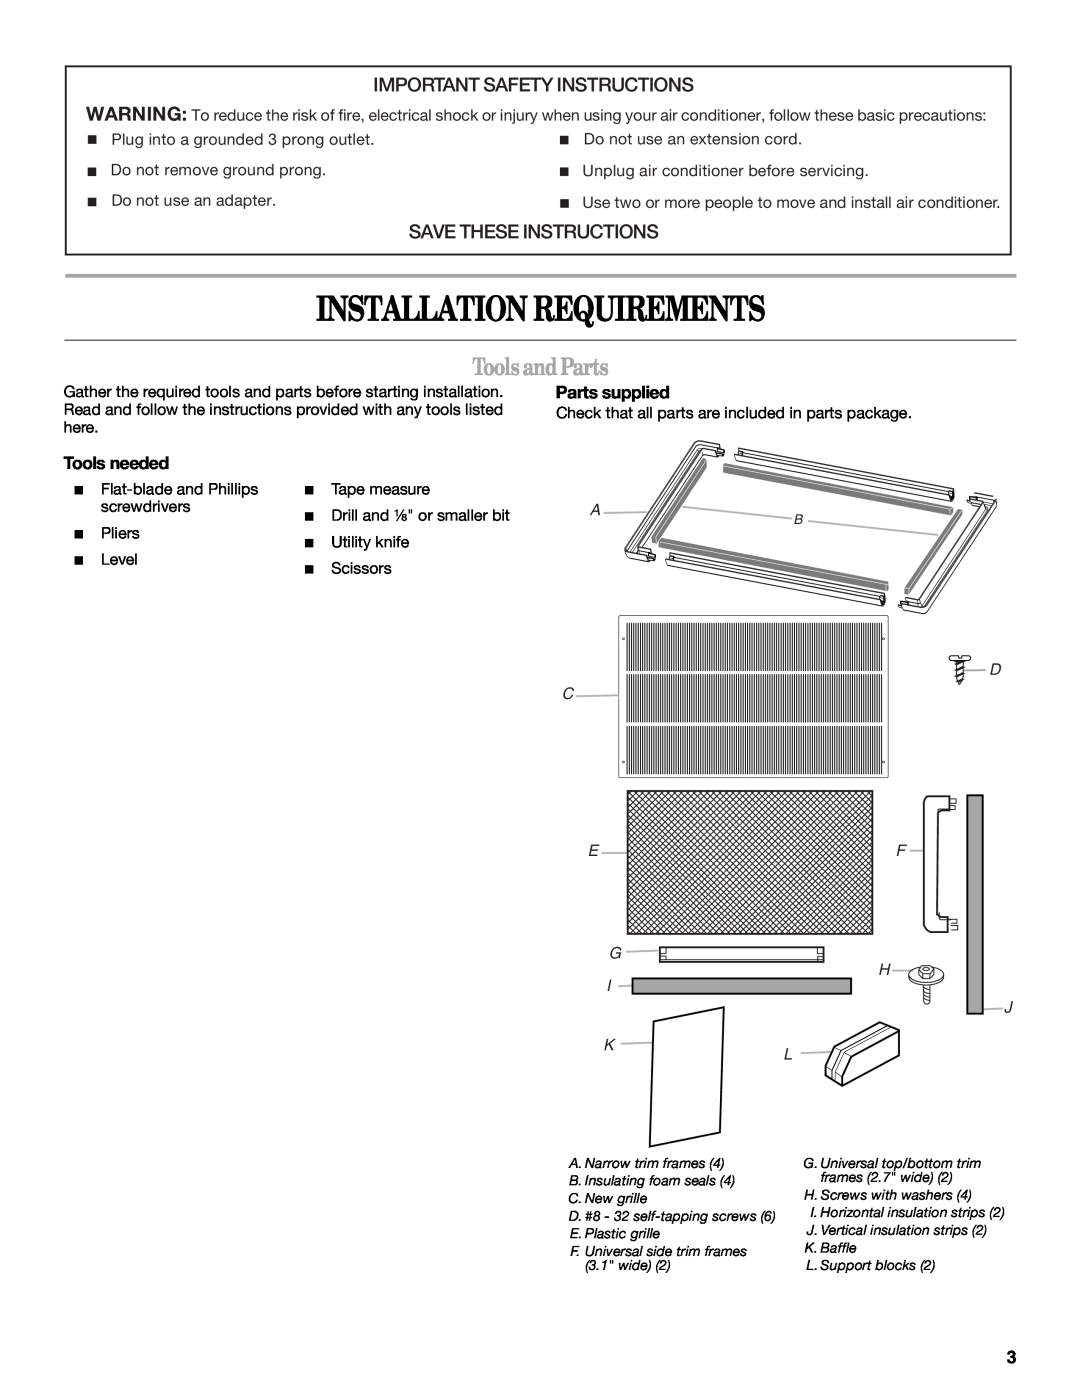 Whirlpool 819041994 Installation Requirements, Tools andParts, Important Safety Instructions, Save These Instructions 